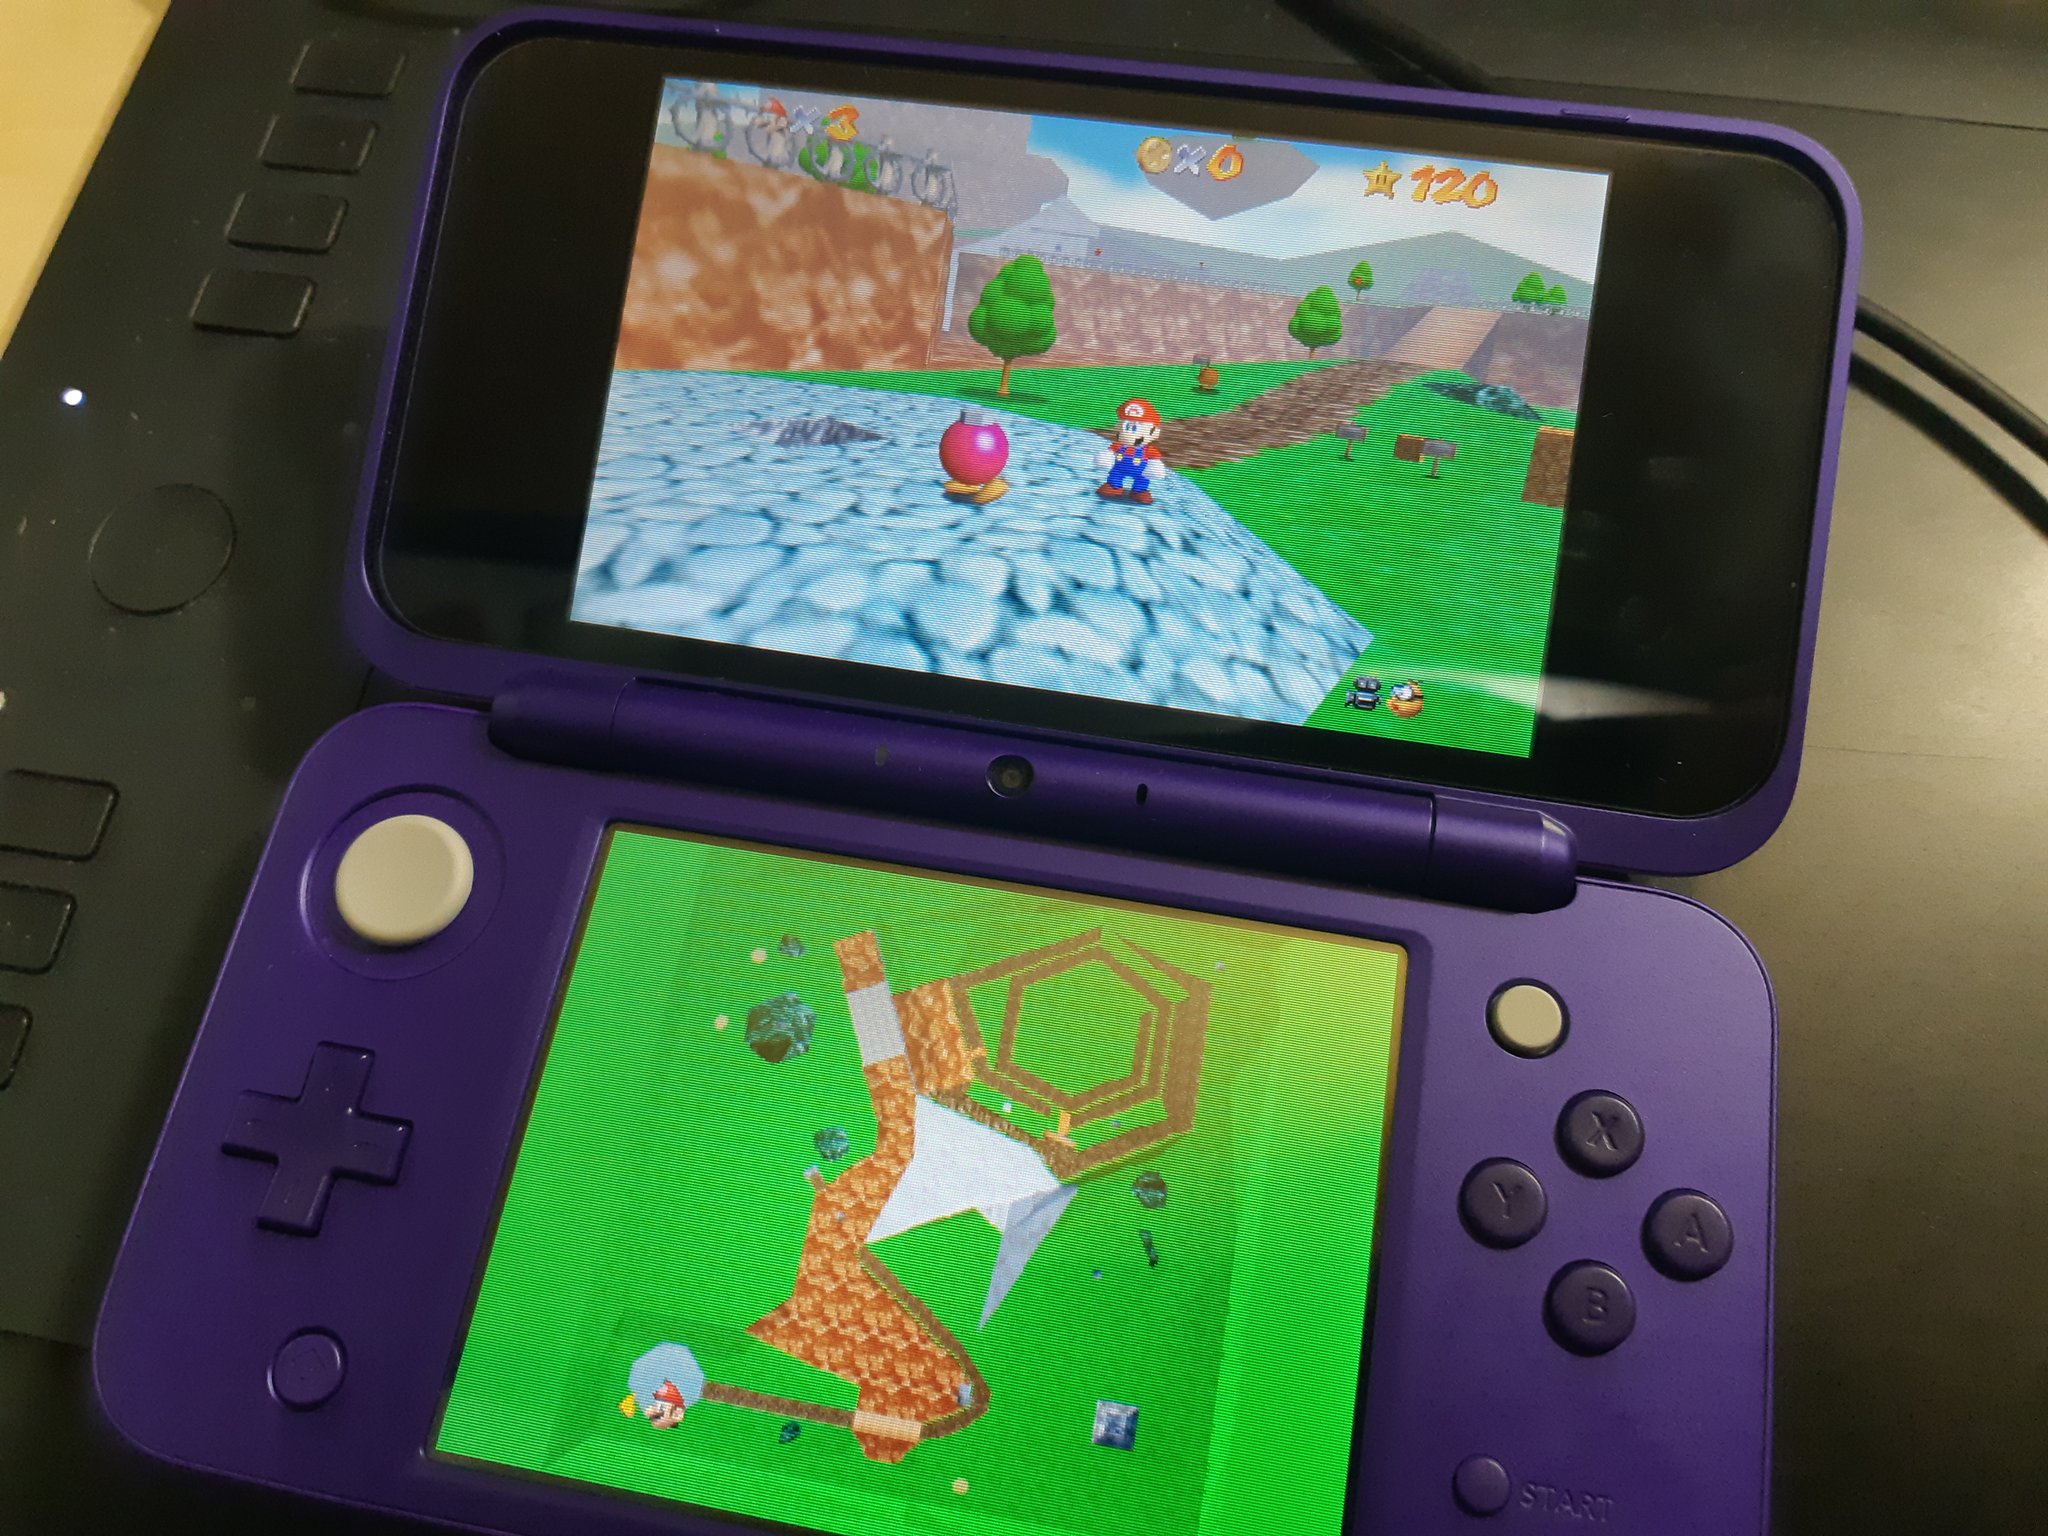 Akfamilyhome on "The Mario 64 3DS source port now has minimap support and can run at a near stable 60fps which is pretty sick. up might be to see stereoscopic